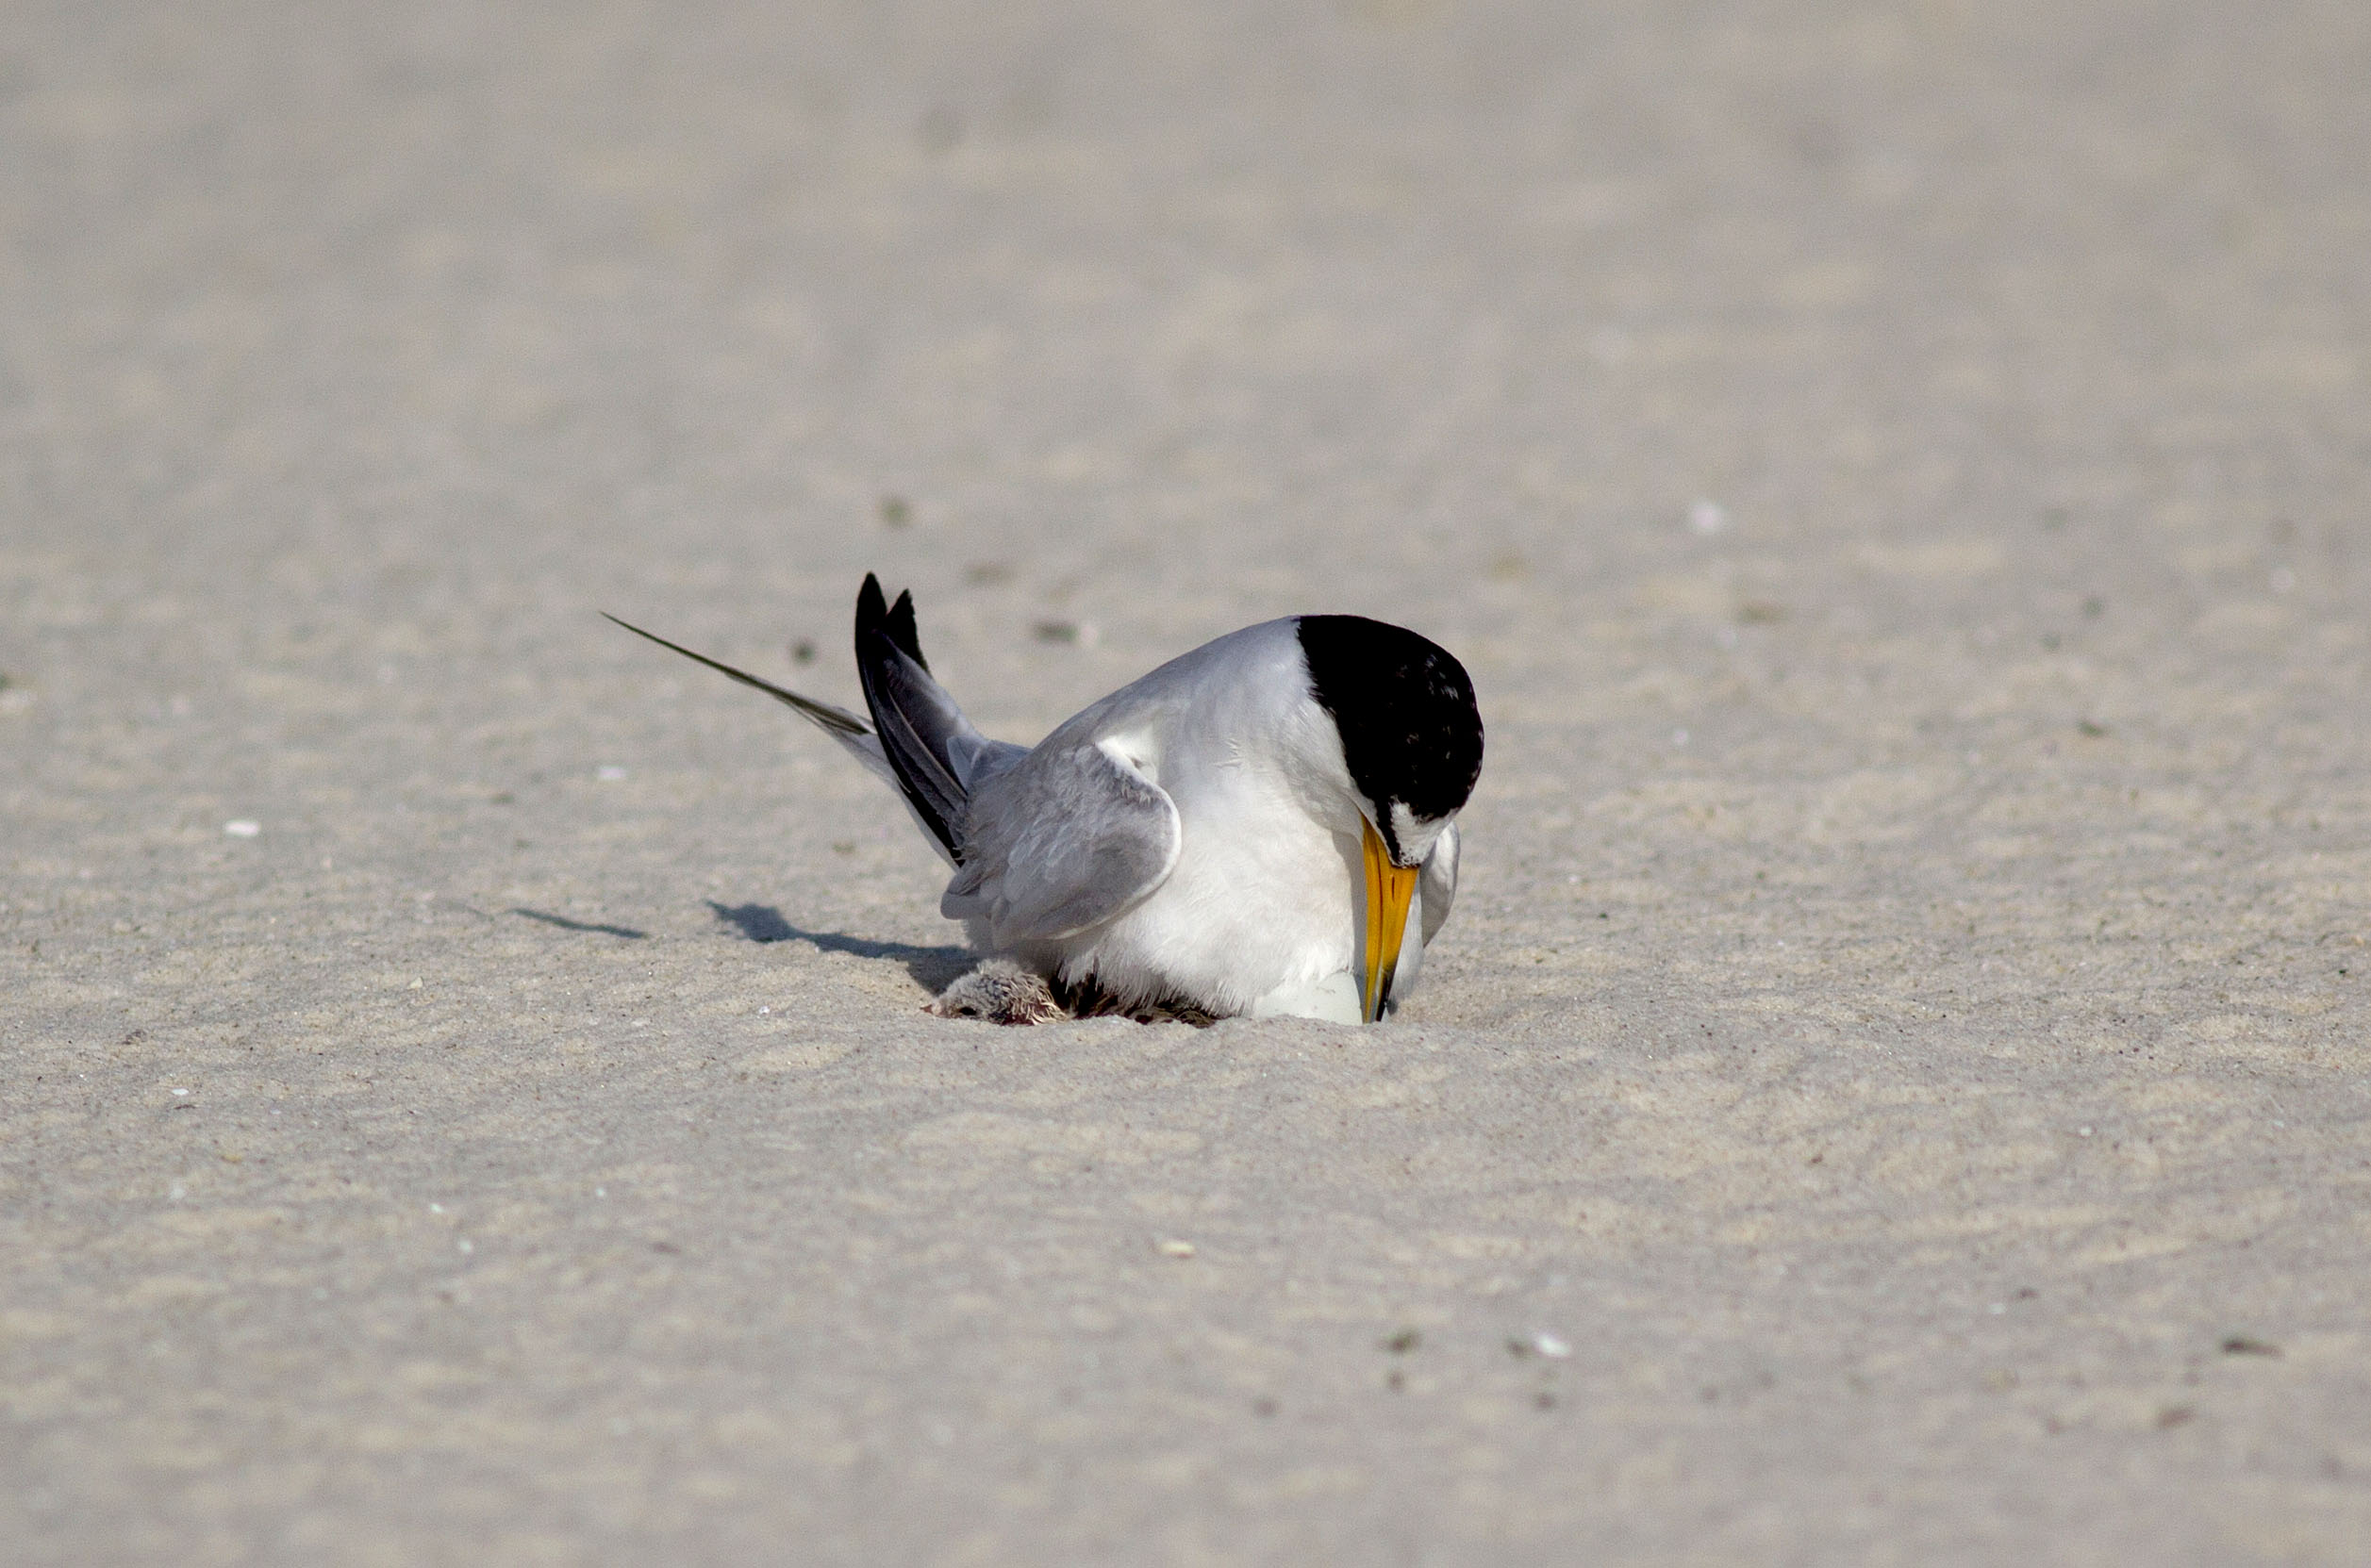 PHOTO: An adult Least Tern is pictured tending to a newly hatched chick on July 23, 2018.